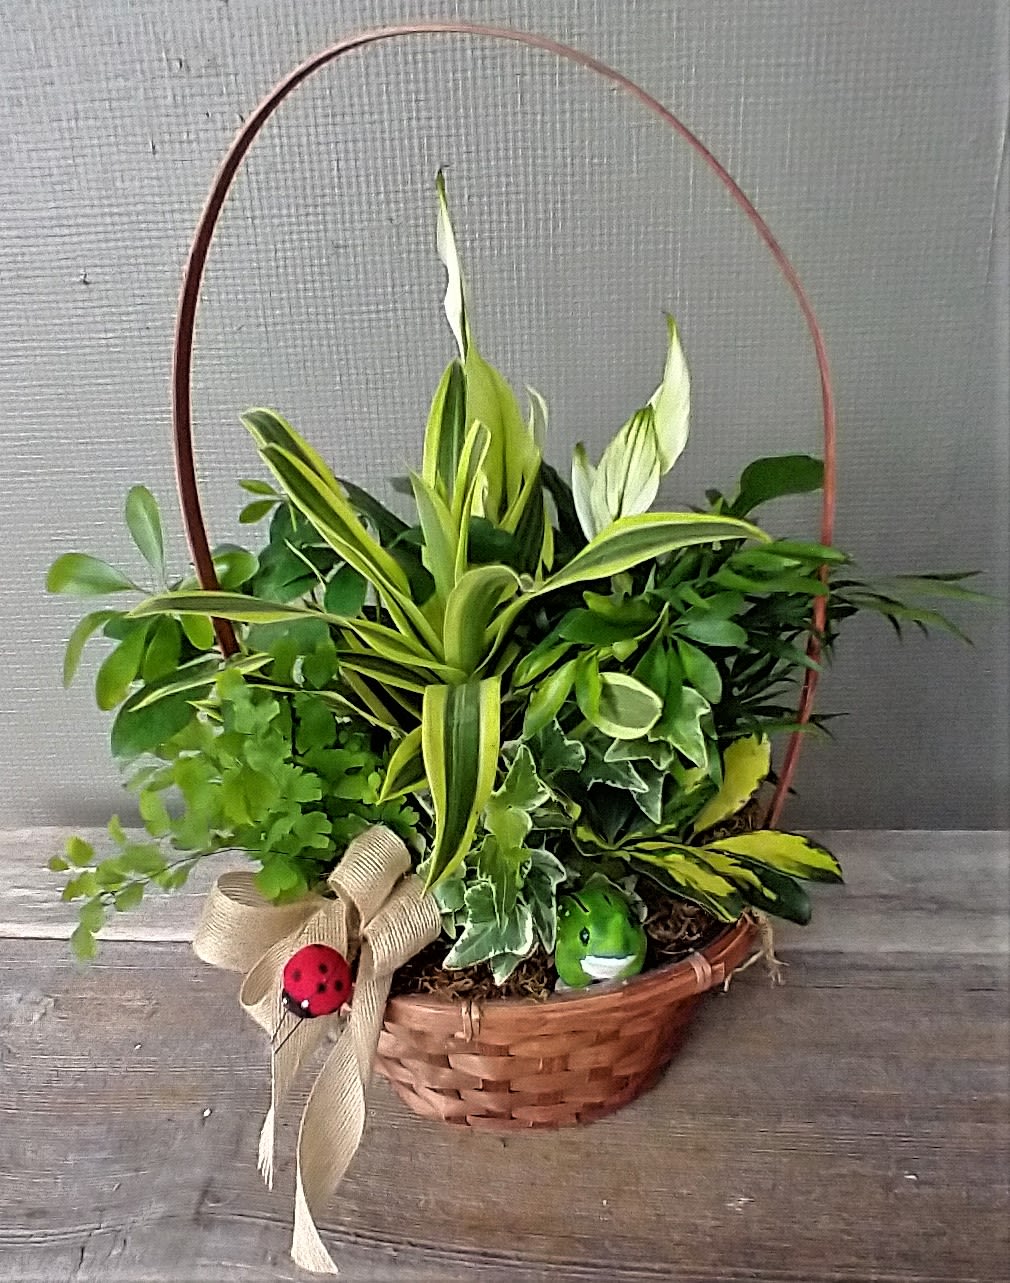 Green Plant Basket Deluxe - A lovely basket with a variety of 7-10 green and variegated plants. Finished with a decorative animal enjoying the lush setting. These plants love Humboldt weather.